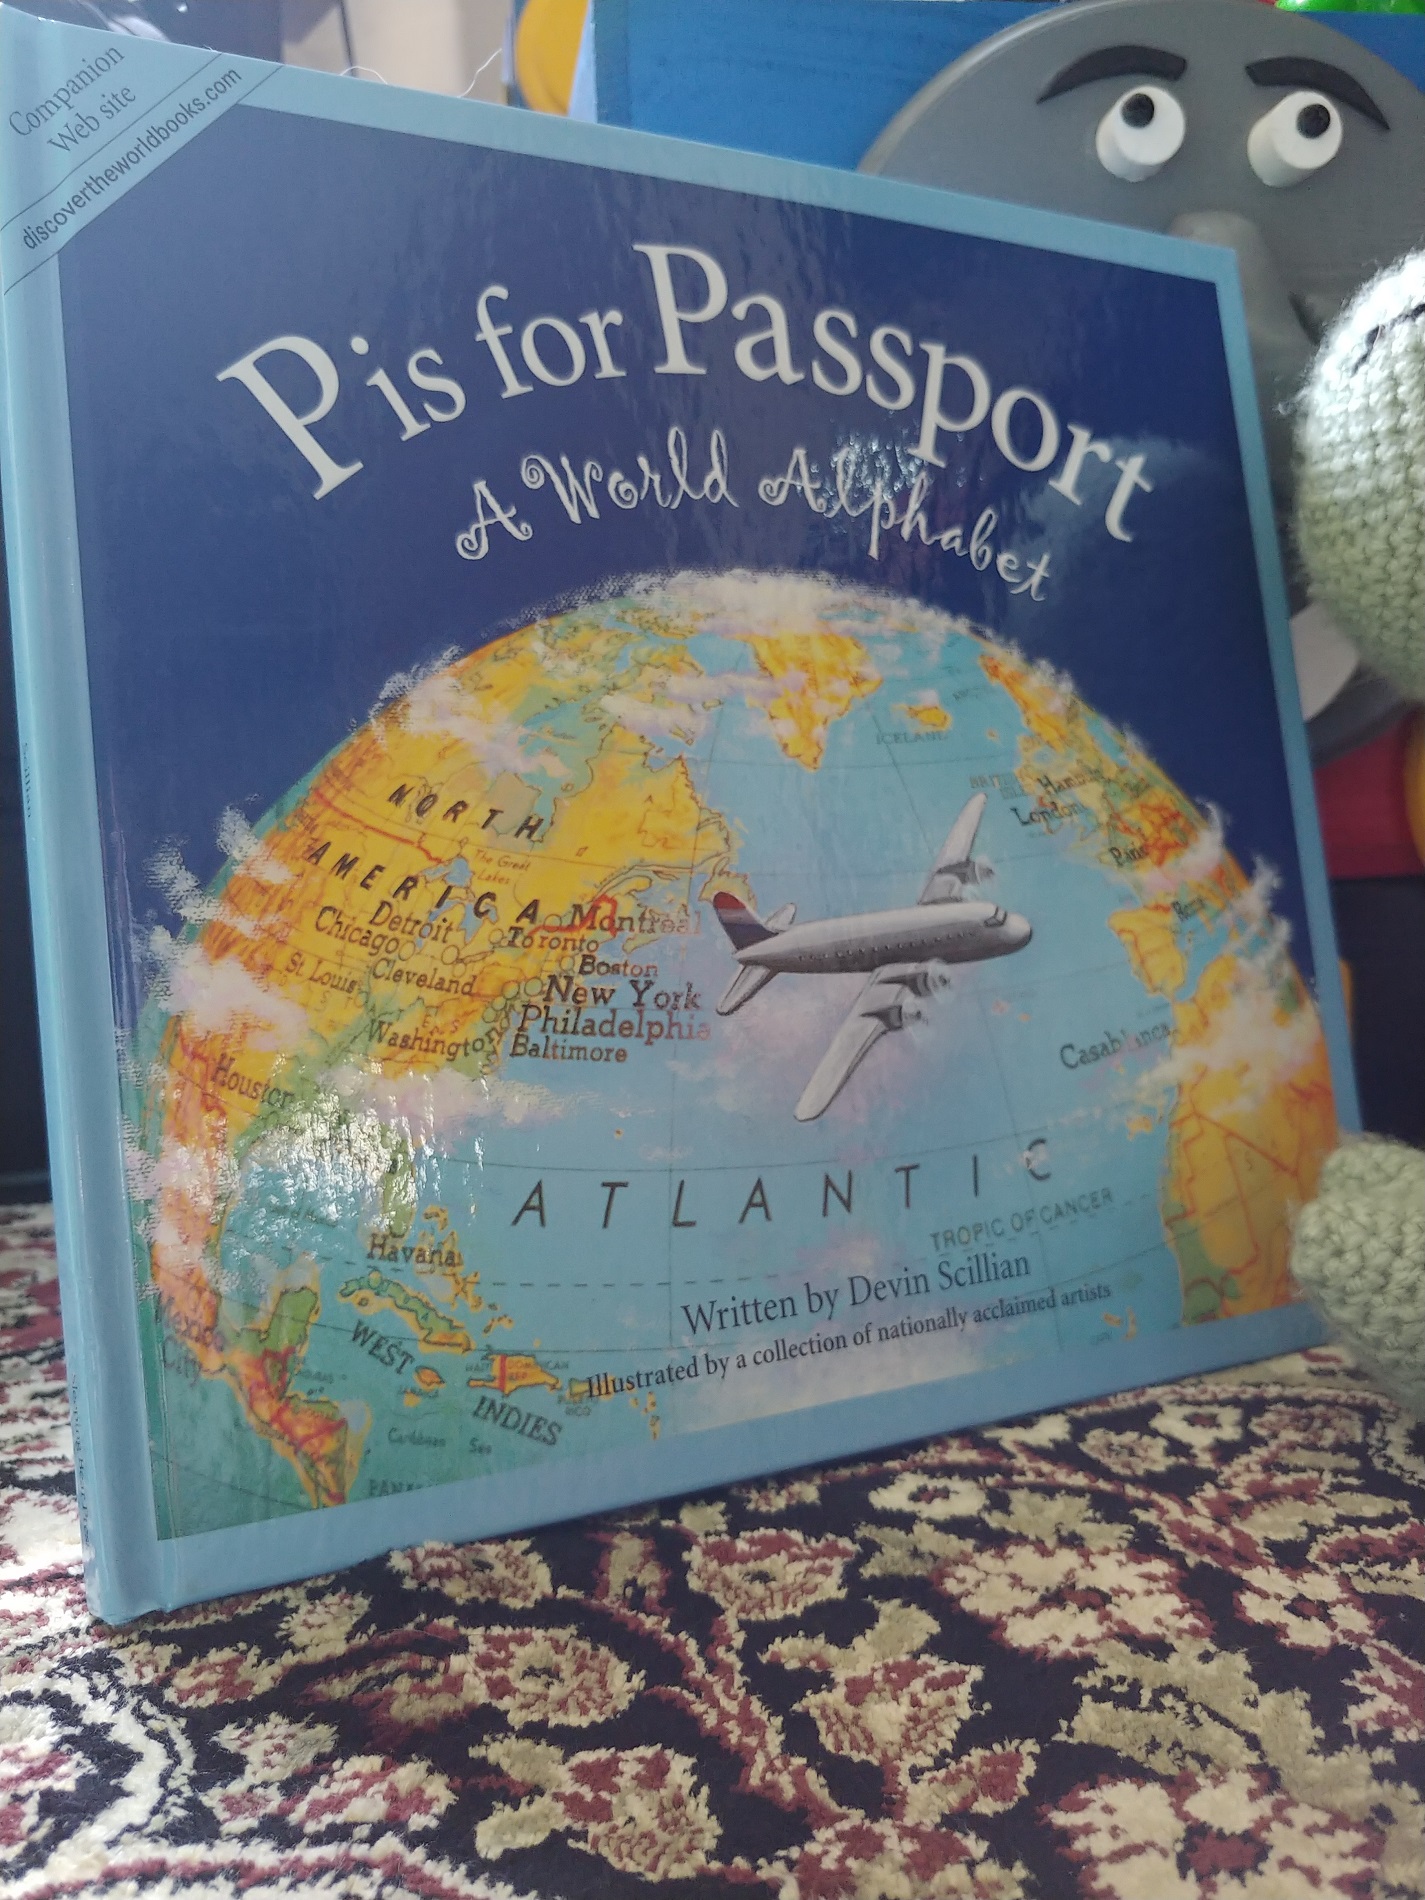 a book with a picture of a plane on it